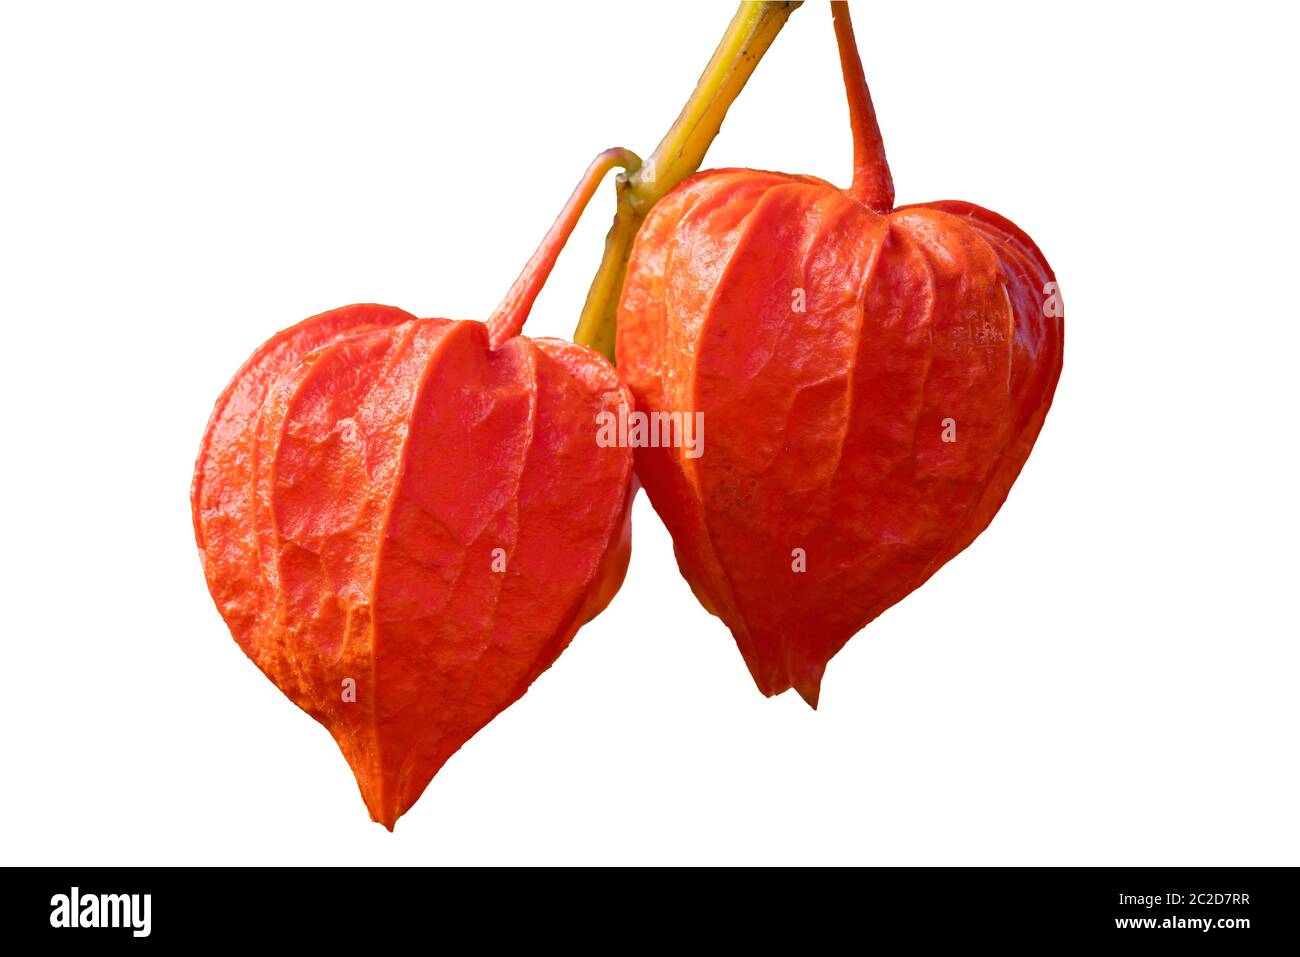 Physalis alkekengi var. franchetii 'Zwerg' fruit with husk commonly known as Chinese Lantern cut out and isolated on a white background Stock Photo